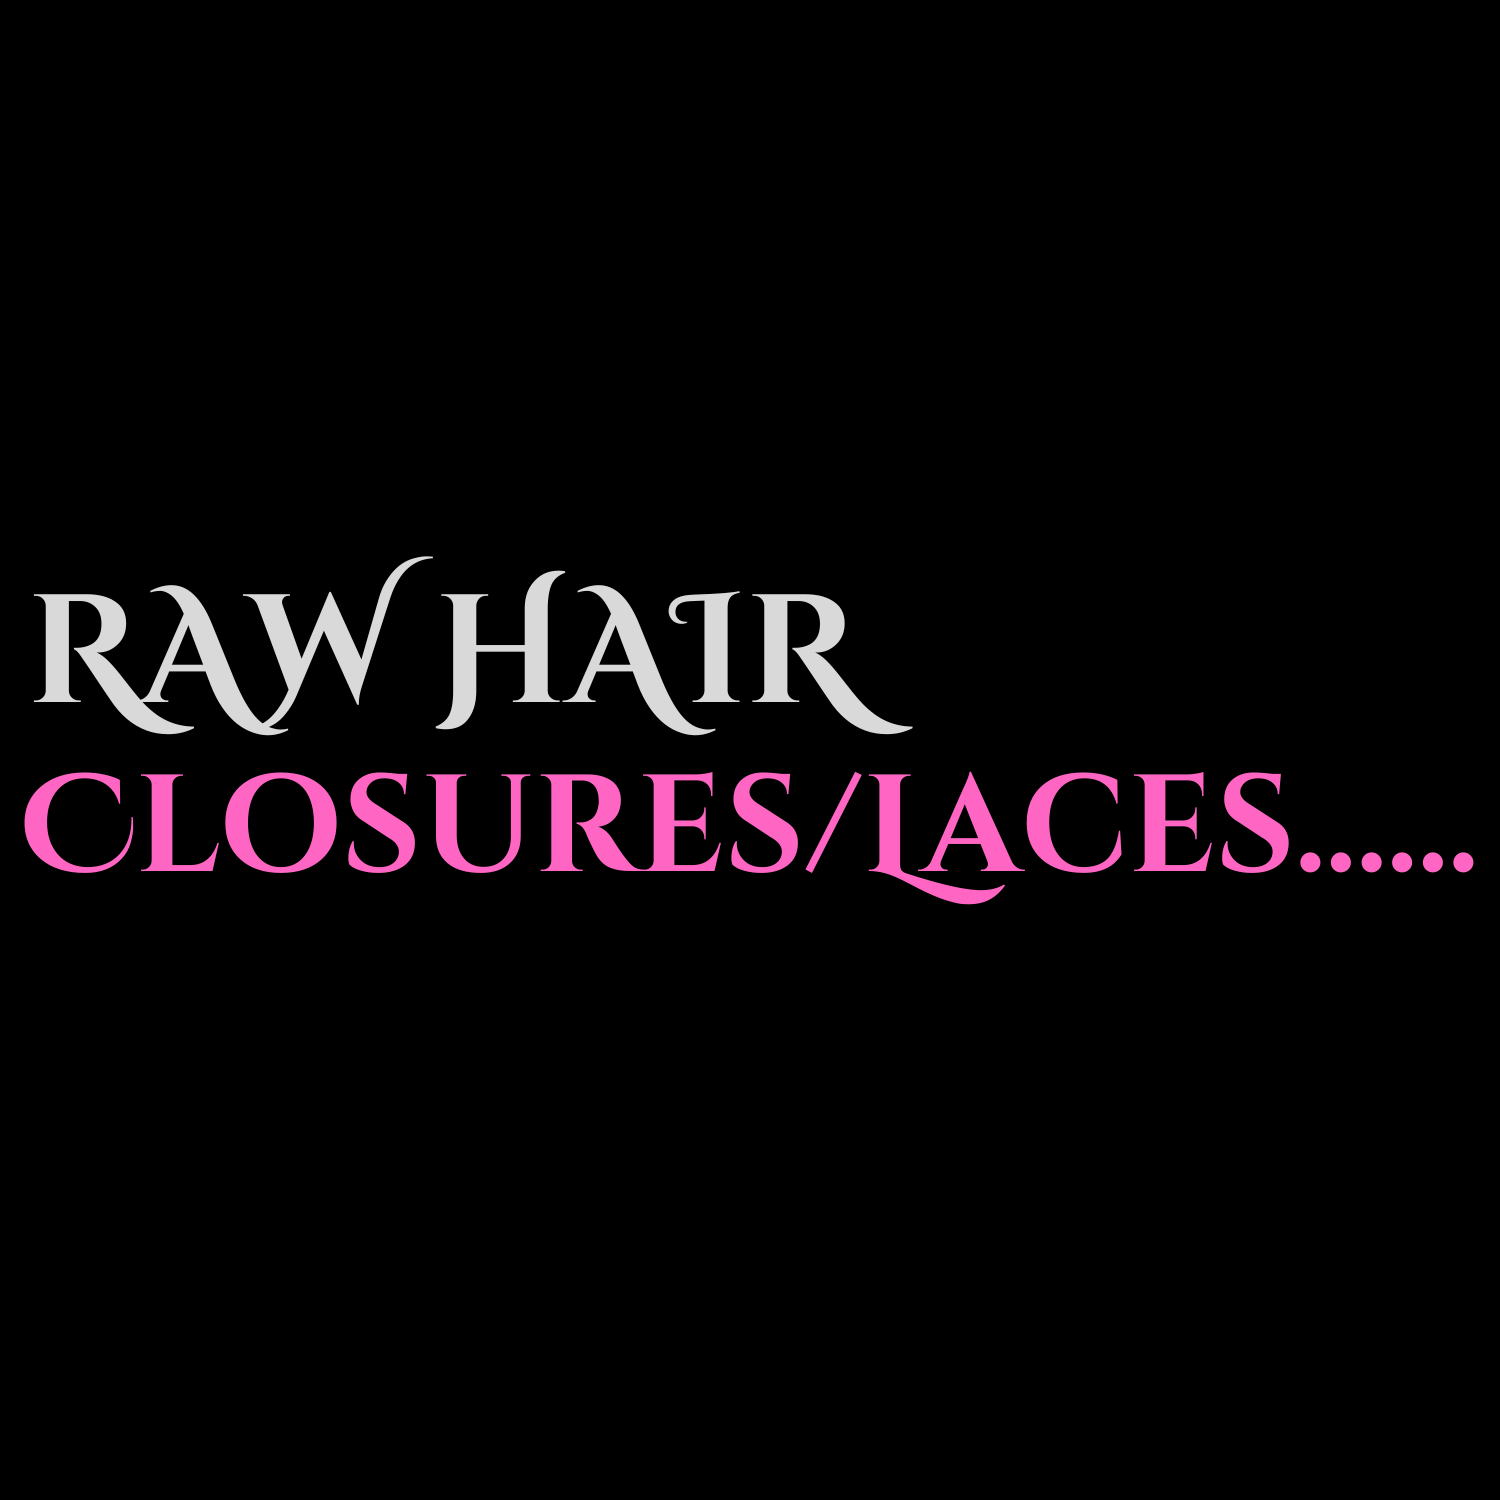 RAW HAIR CLOSURES/LACES